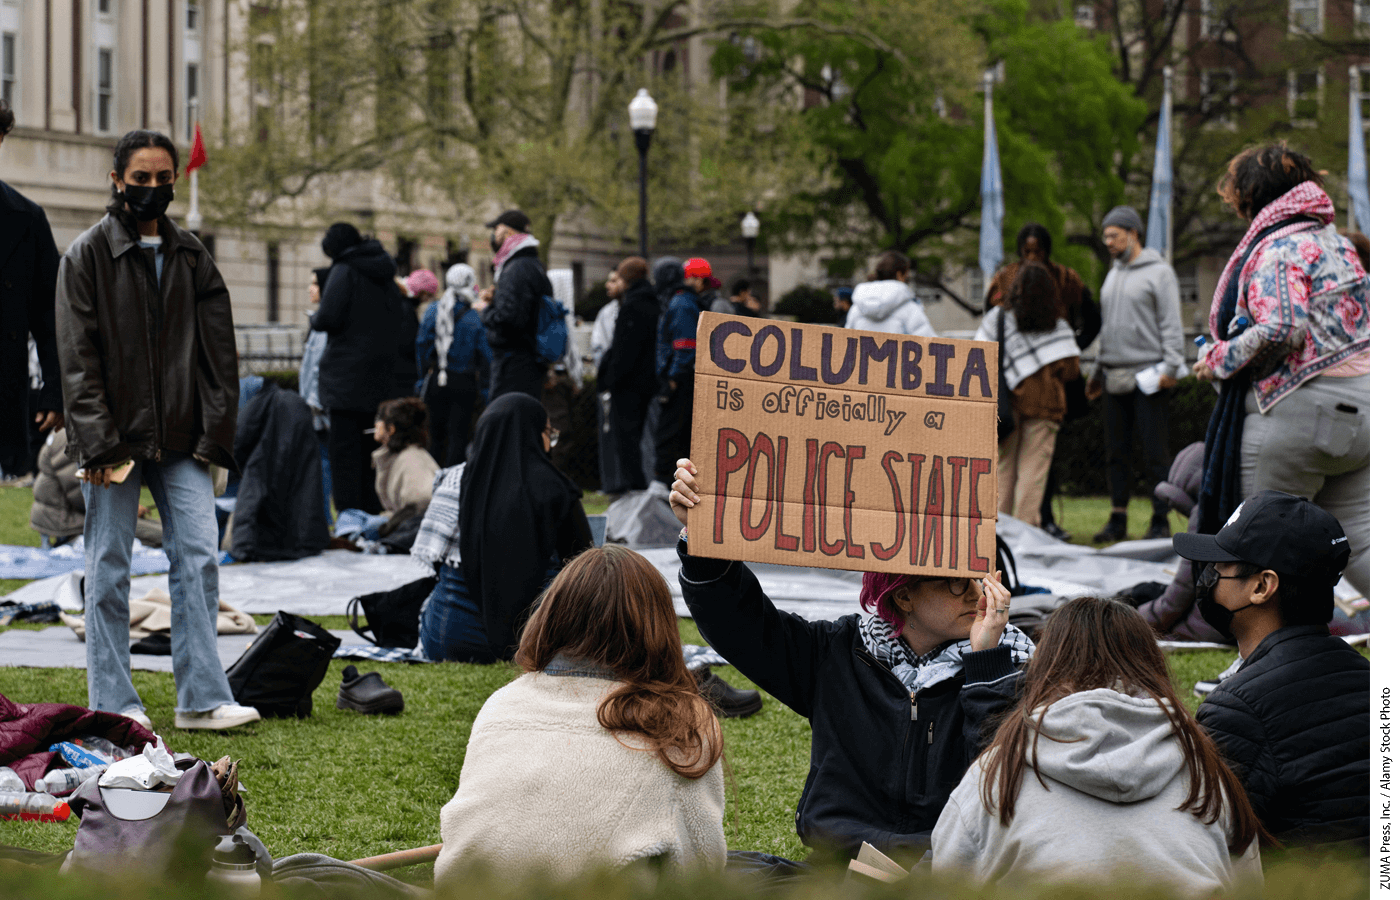 19th Apr, 2024. Despite over a hundred arrests the previous day, the student-led pro-Palestinian encampment at Columbia University has now relocated to a different quadrant of the lawn after the previous day's disbandment by the NYPD.